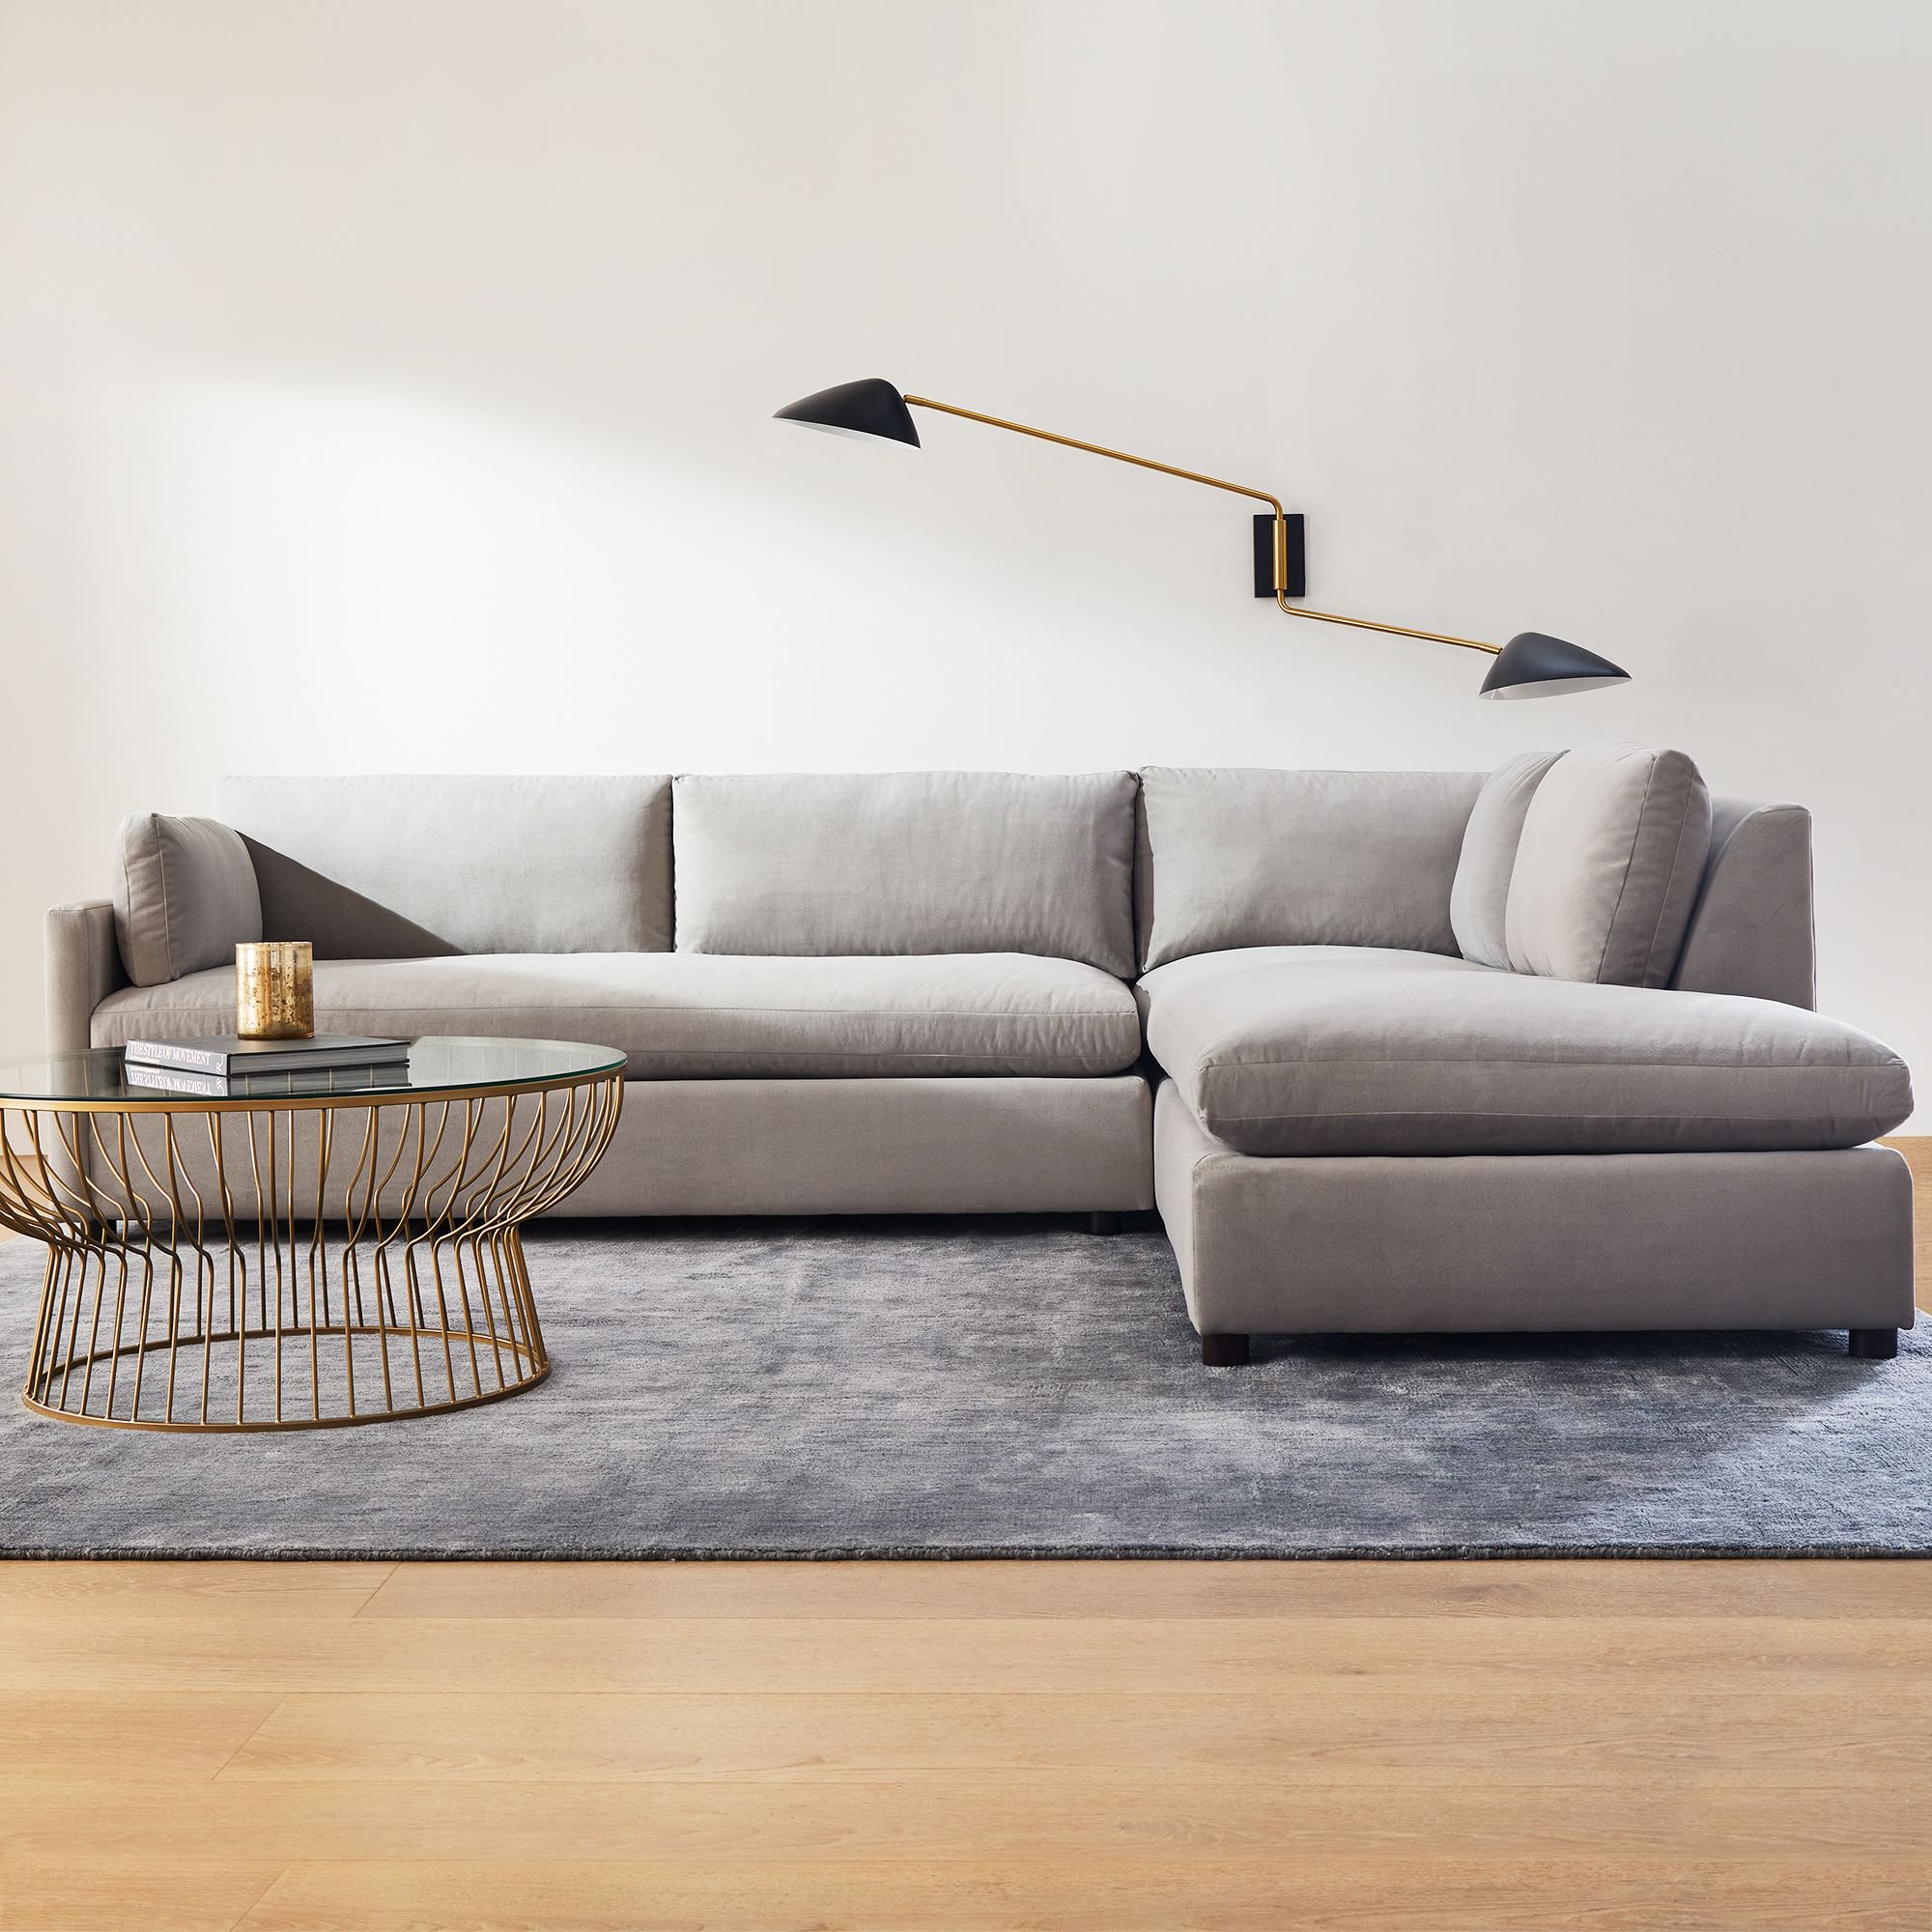 Sofa Cushion 101 – Which Cushion Is the best fit for you?